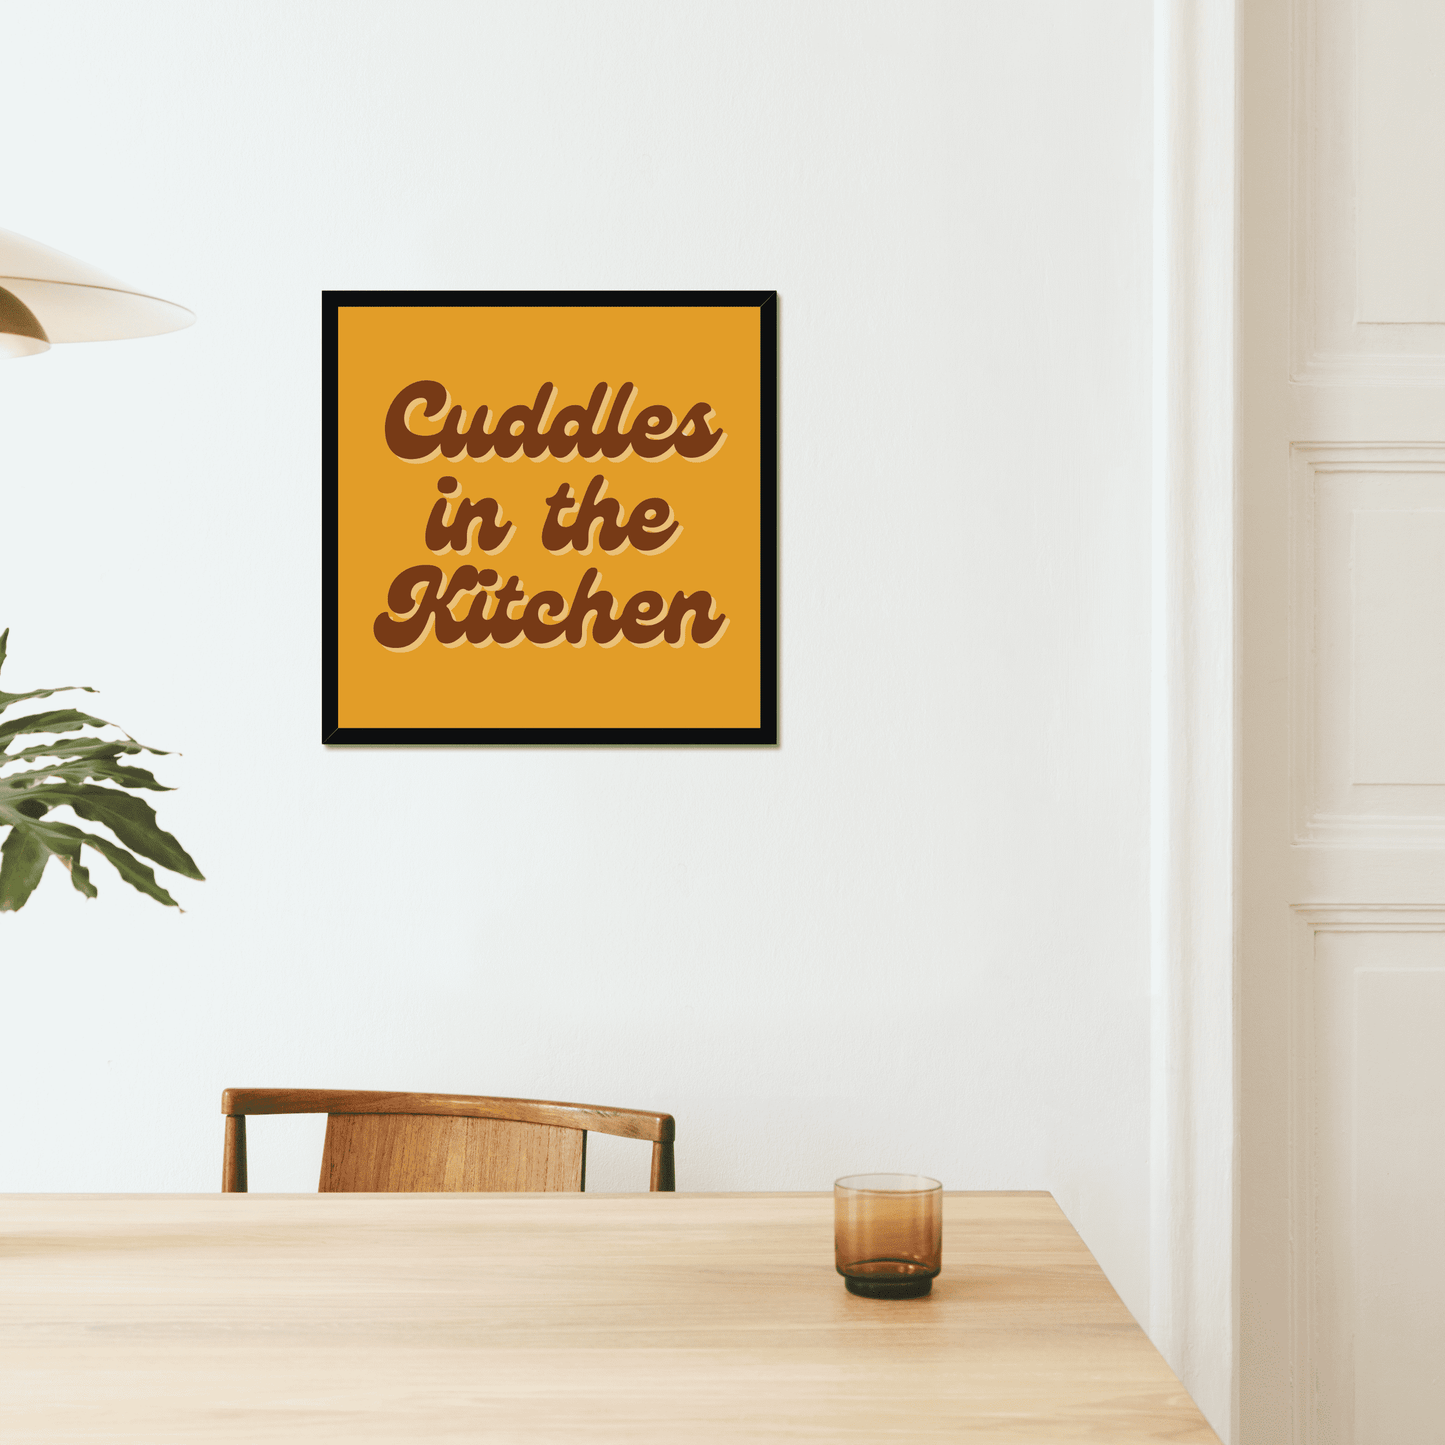 Cuddles in the kitchen art print. A bold and quirky print to make a fun statement in your home. A mustard orange yellow background with a retro brown font. We love this Arctic Monkeys, Mardy Bum inspired print.